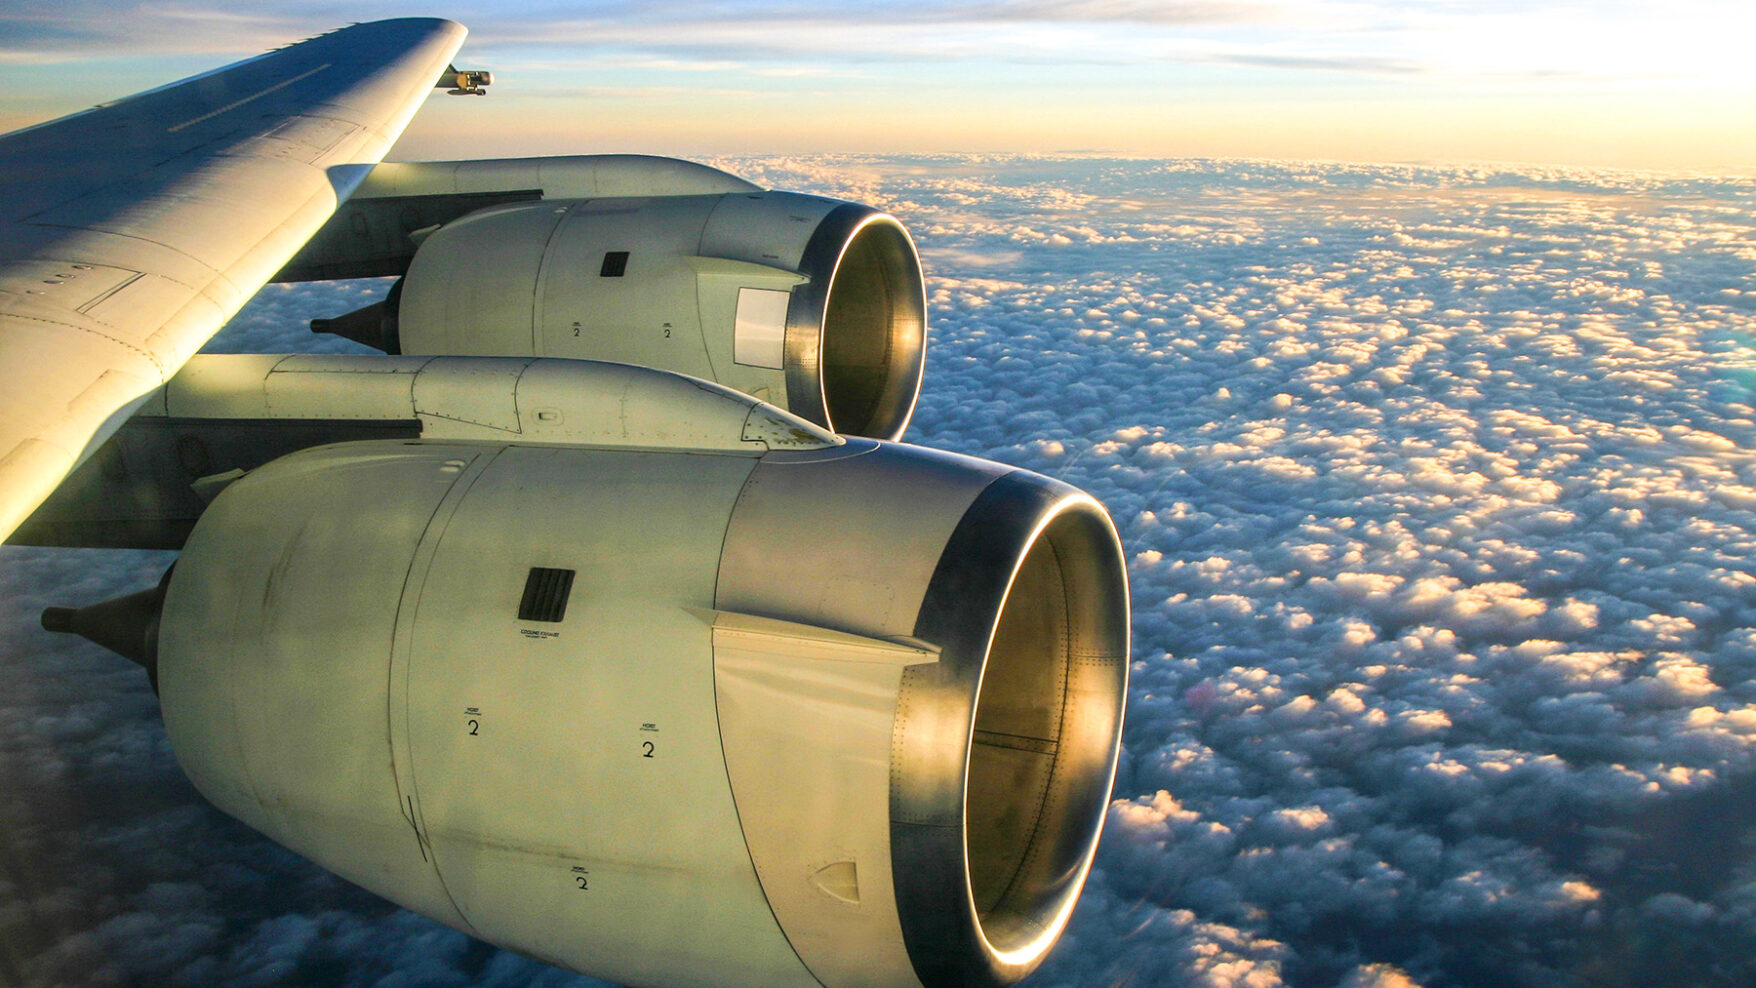 A picture of jet engines as seen out of a plane in flight